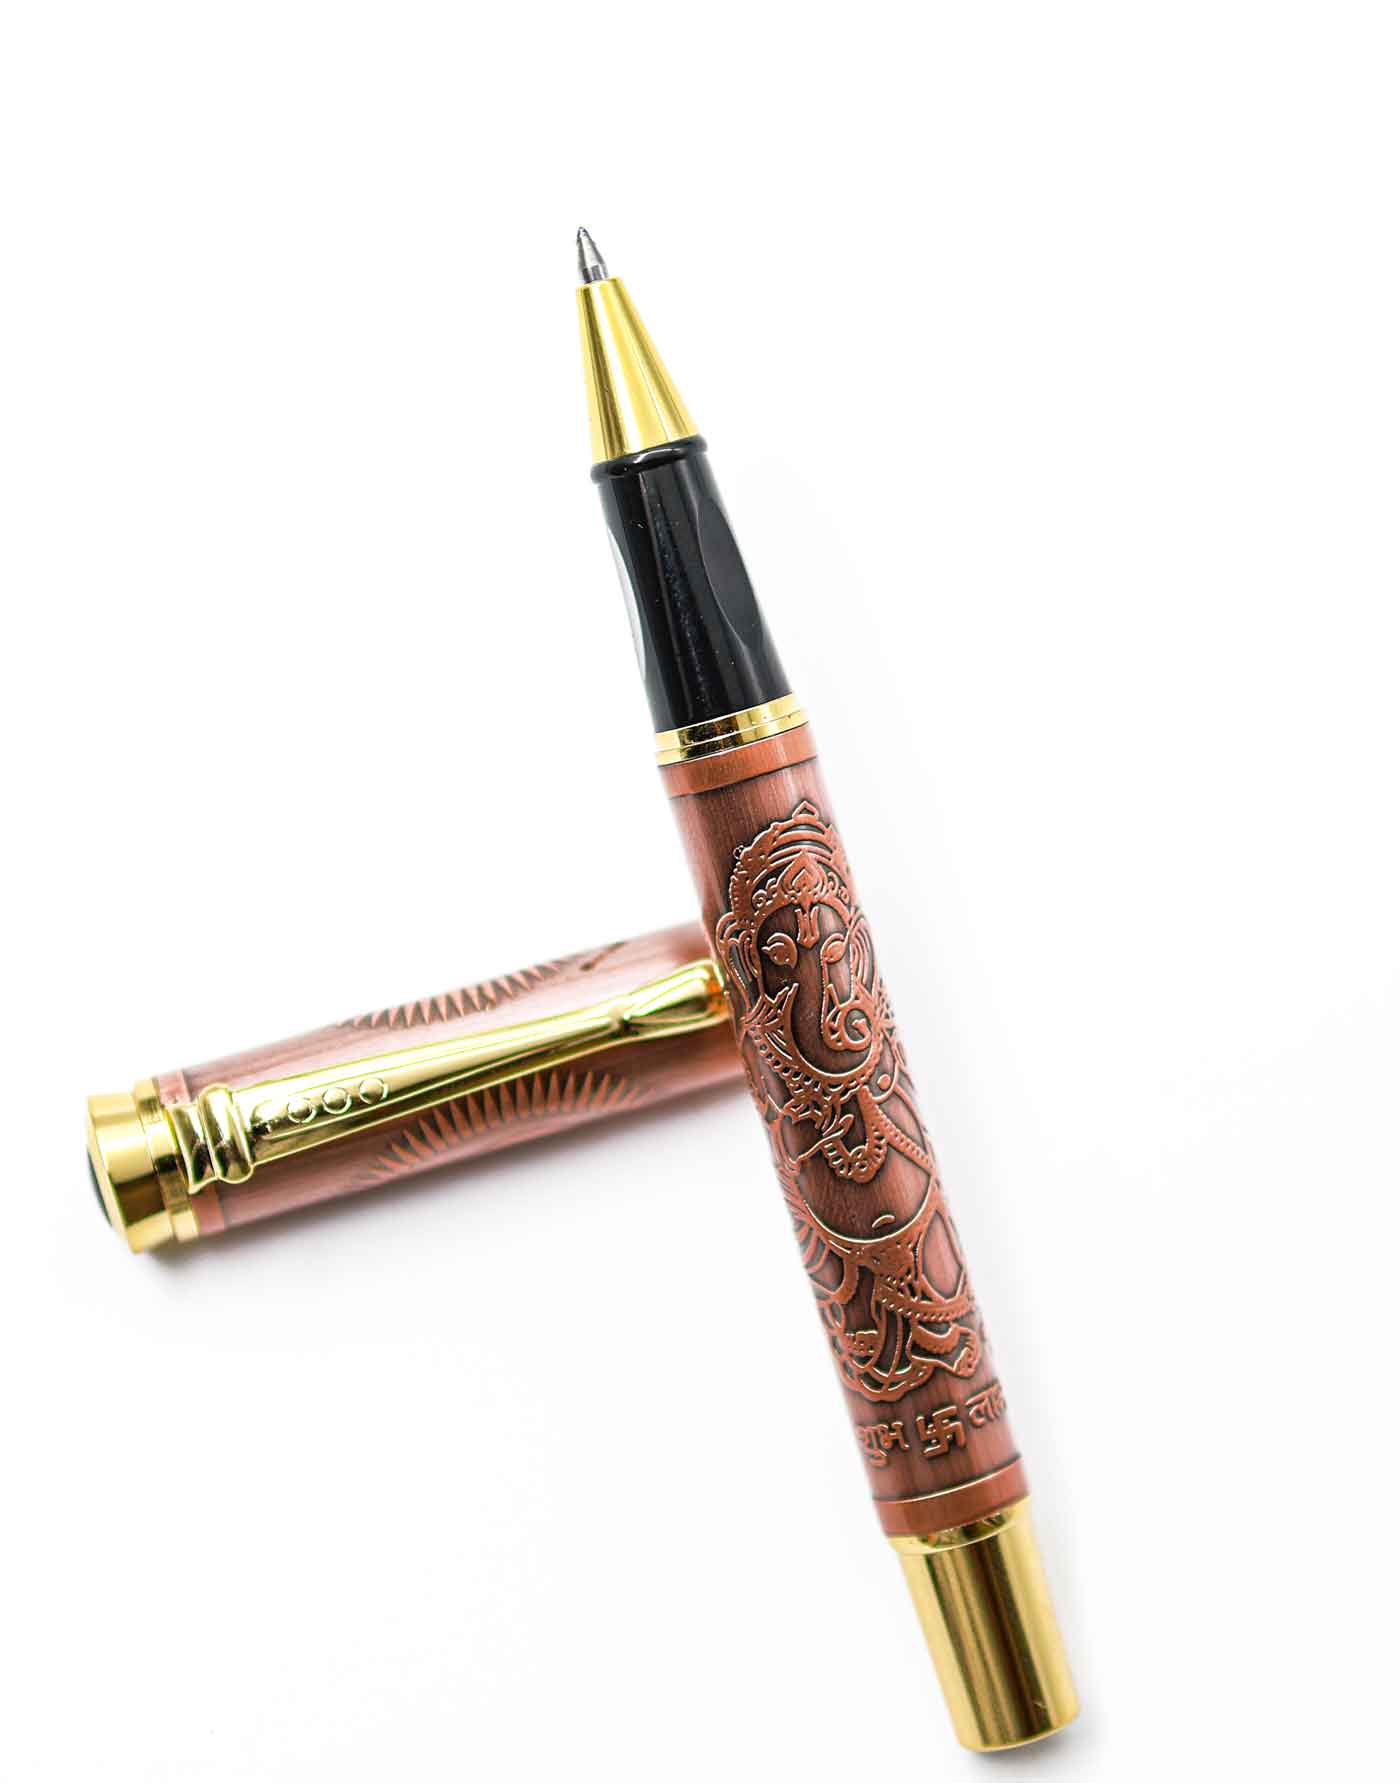 Levin 102 Ganesh Printed Copper Body With Golden Trim And Clip Black Color Grip Fine Tip Cap Type Roller Ball Pen SKU 25176